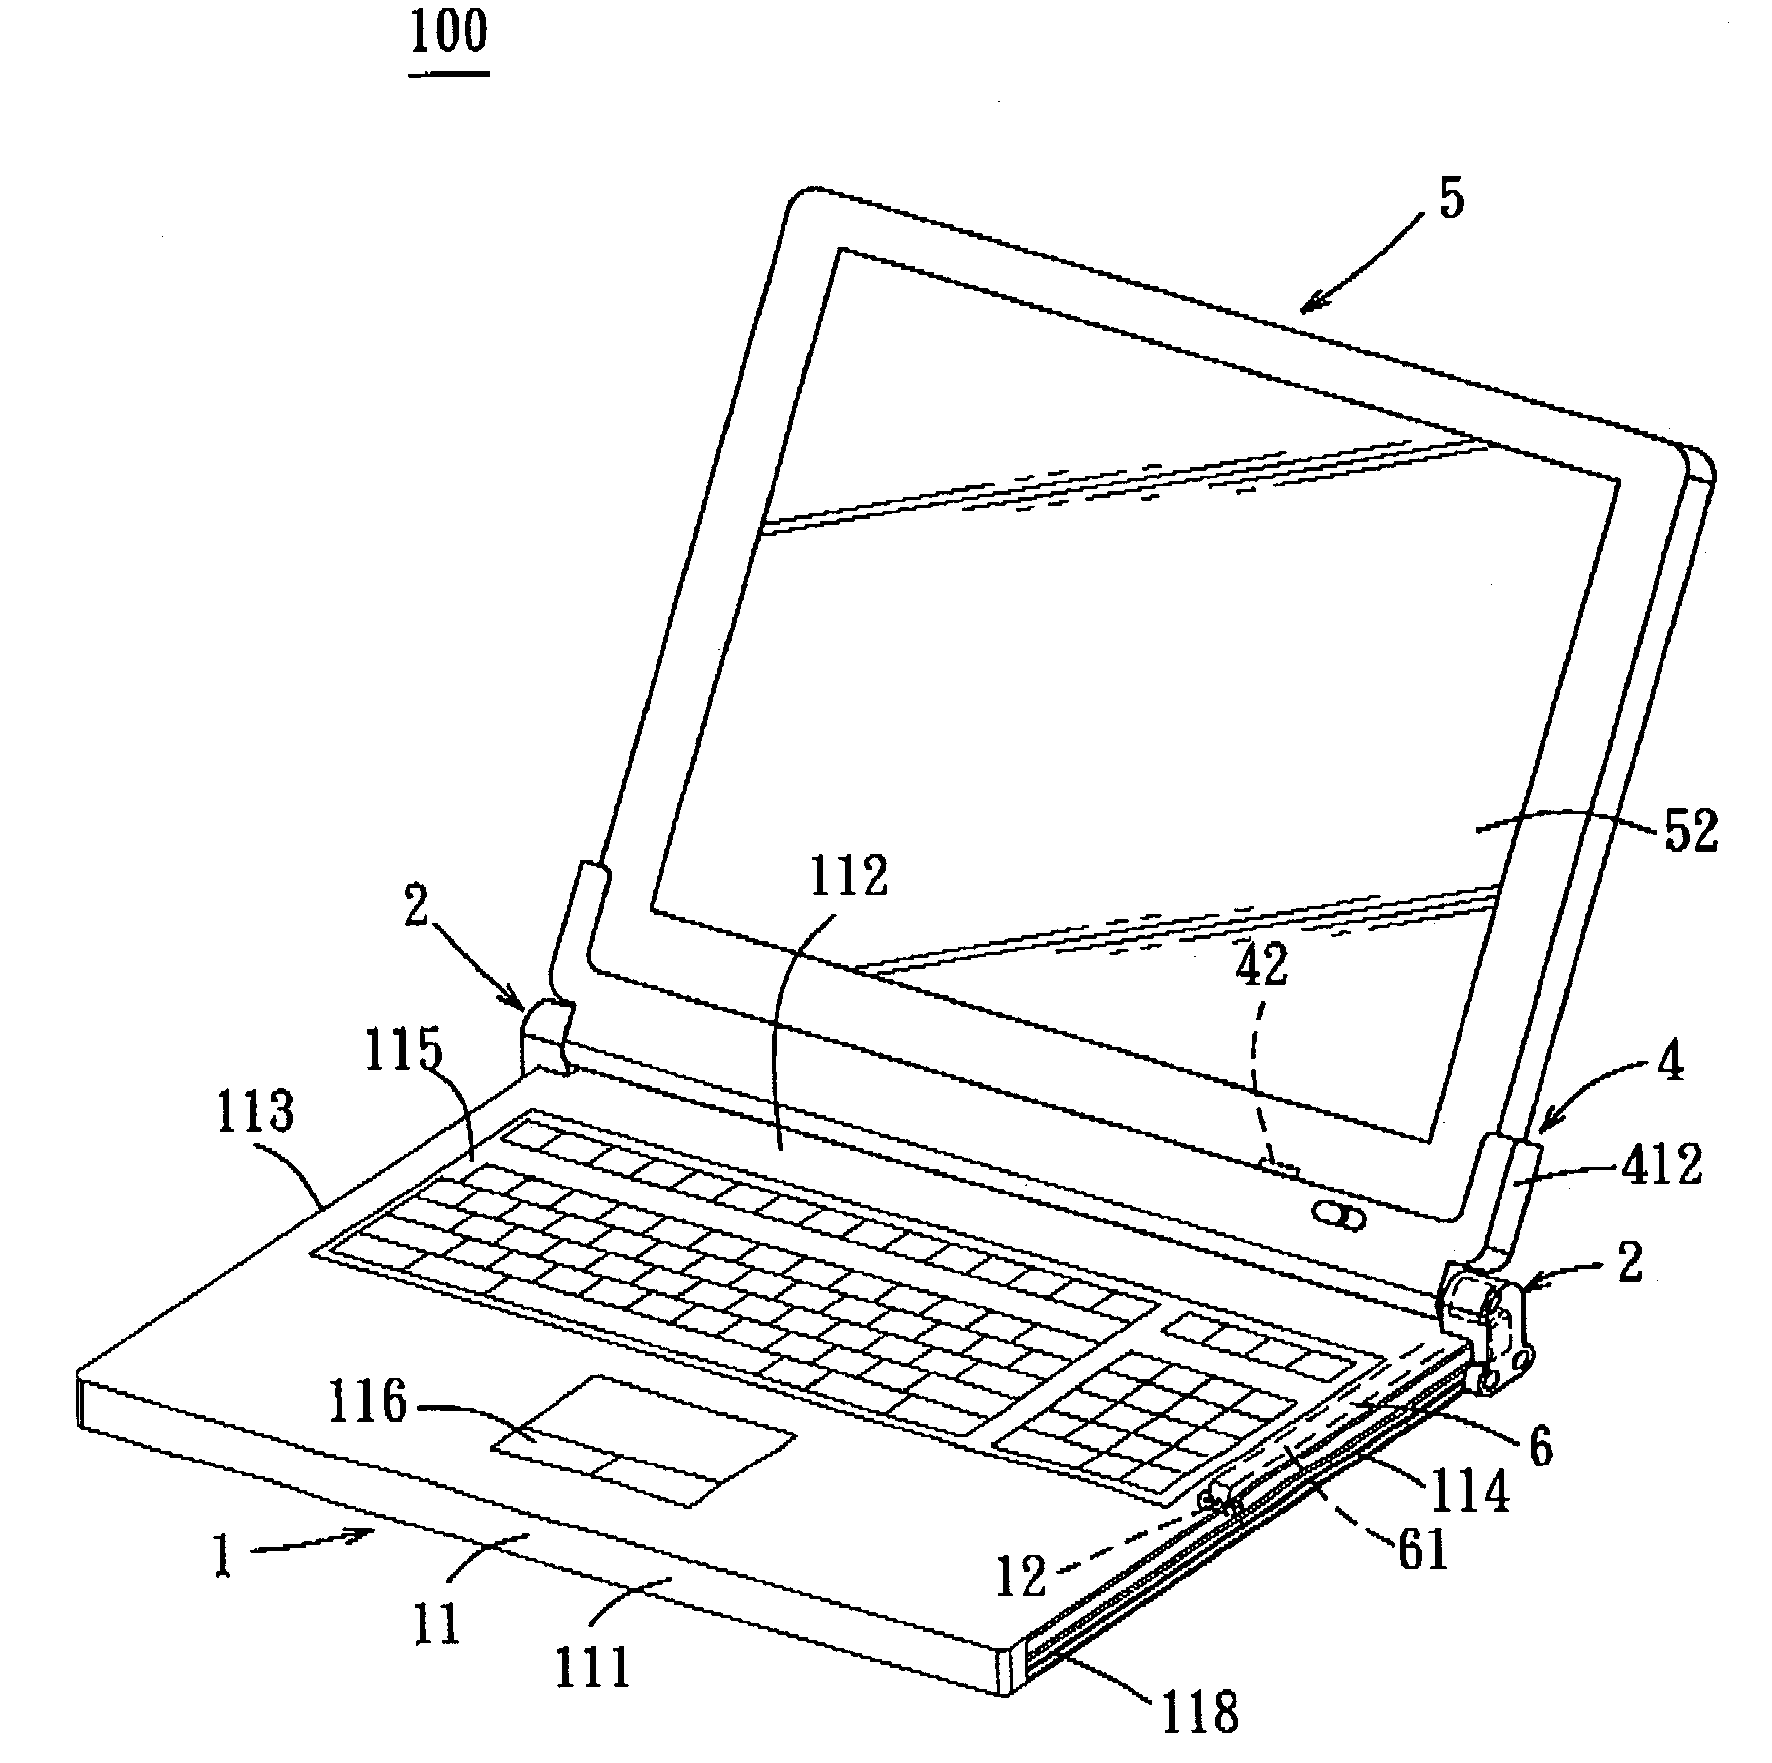 Portable electronic device with a hinge mechanism